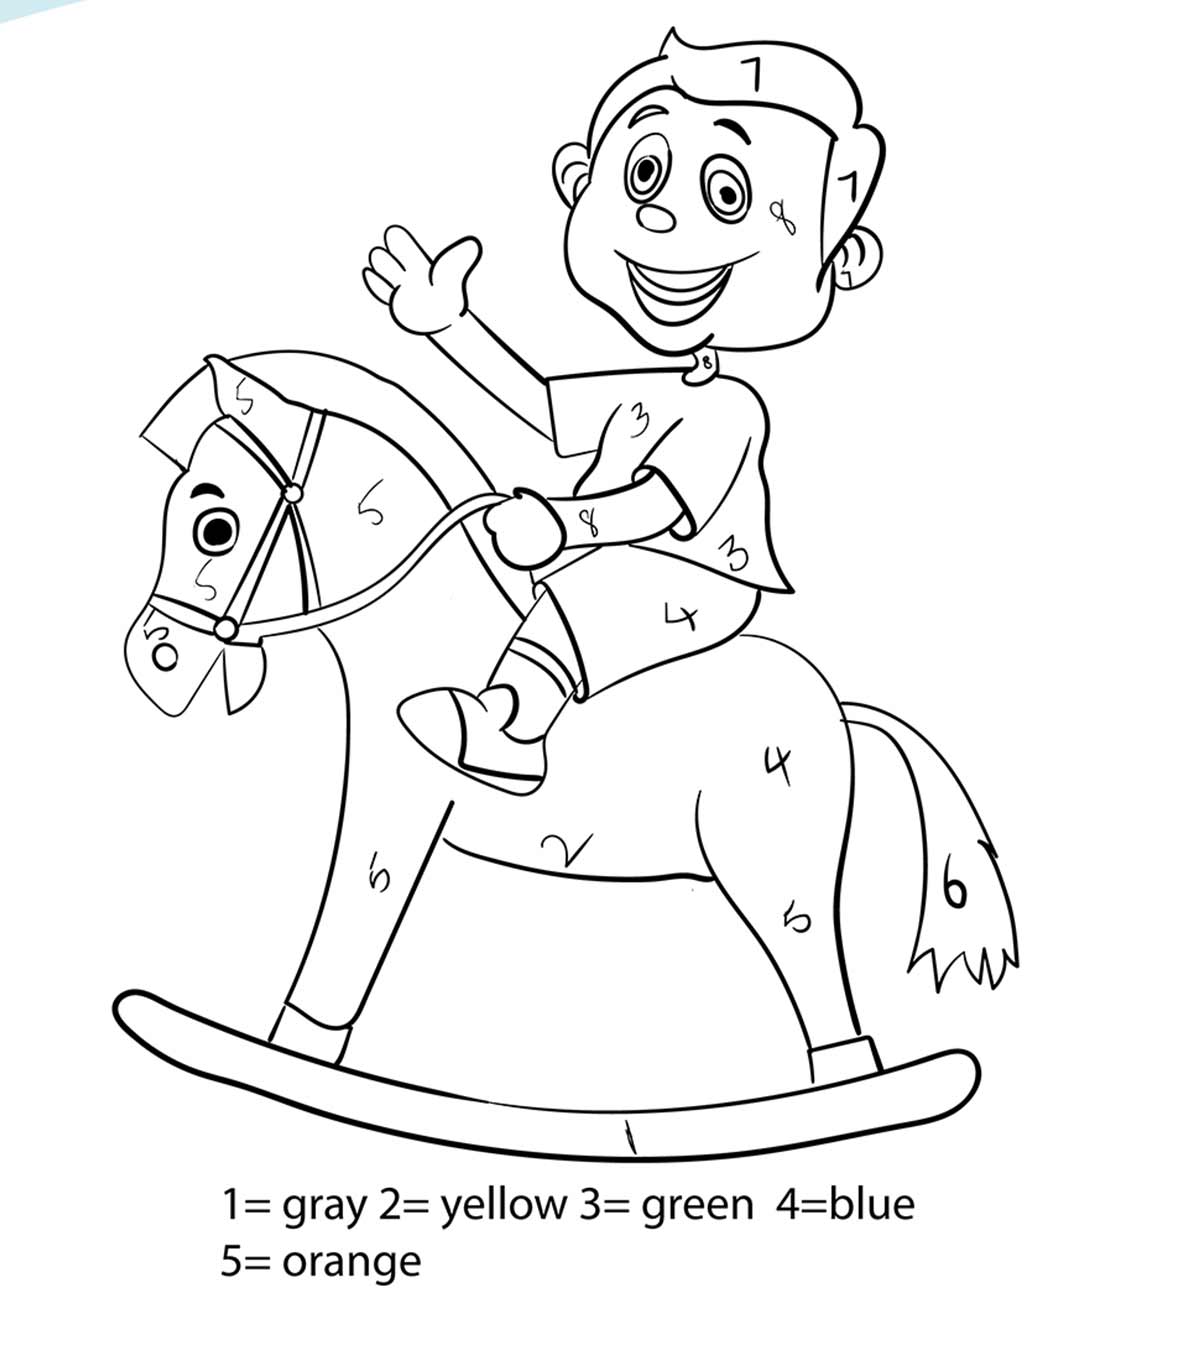 Eductional Coloring Pages - MomJunction